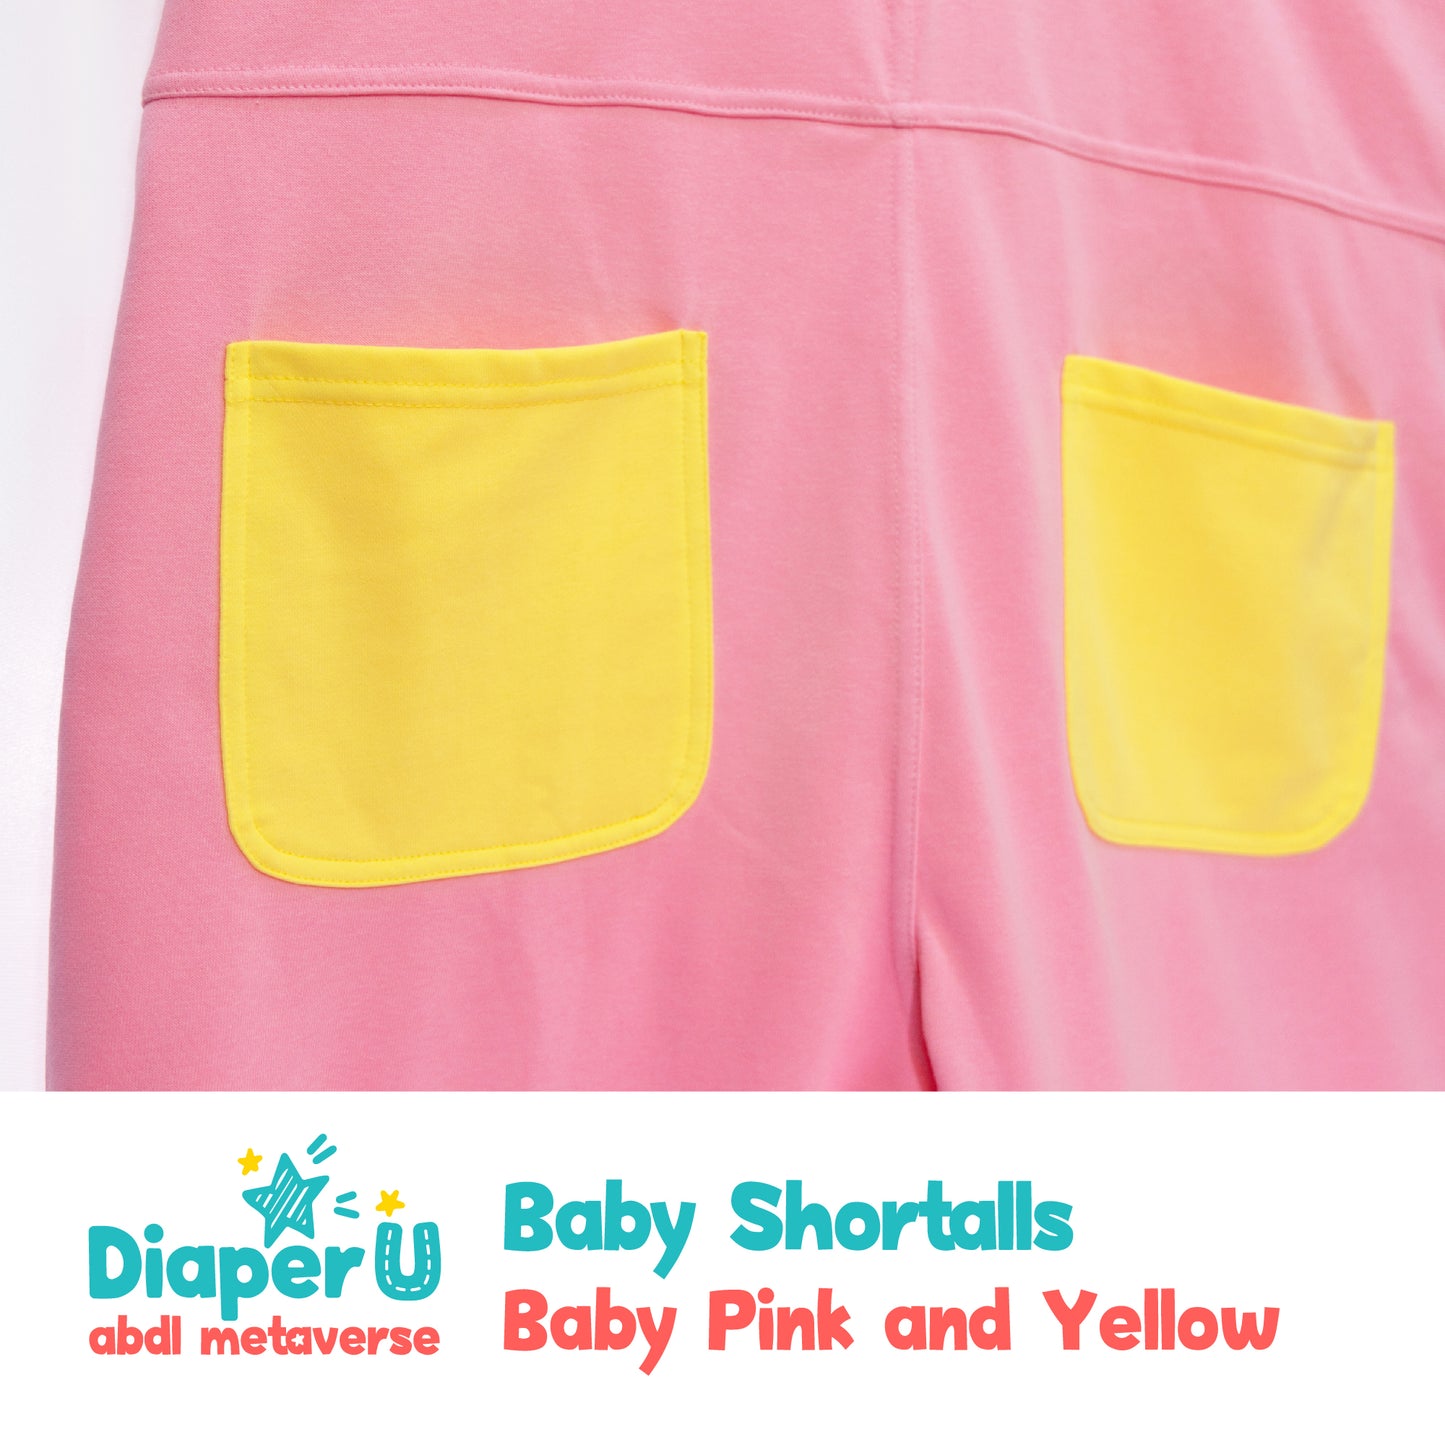 Baby Shortalls - Baby Pink and Yellow (Unisex)